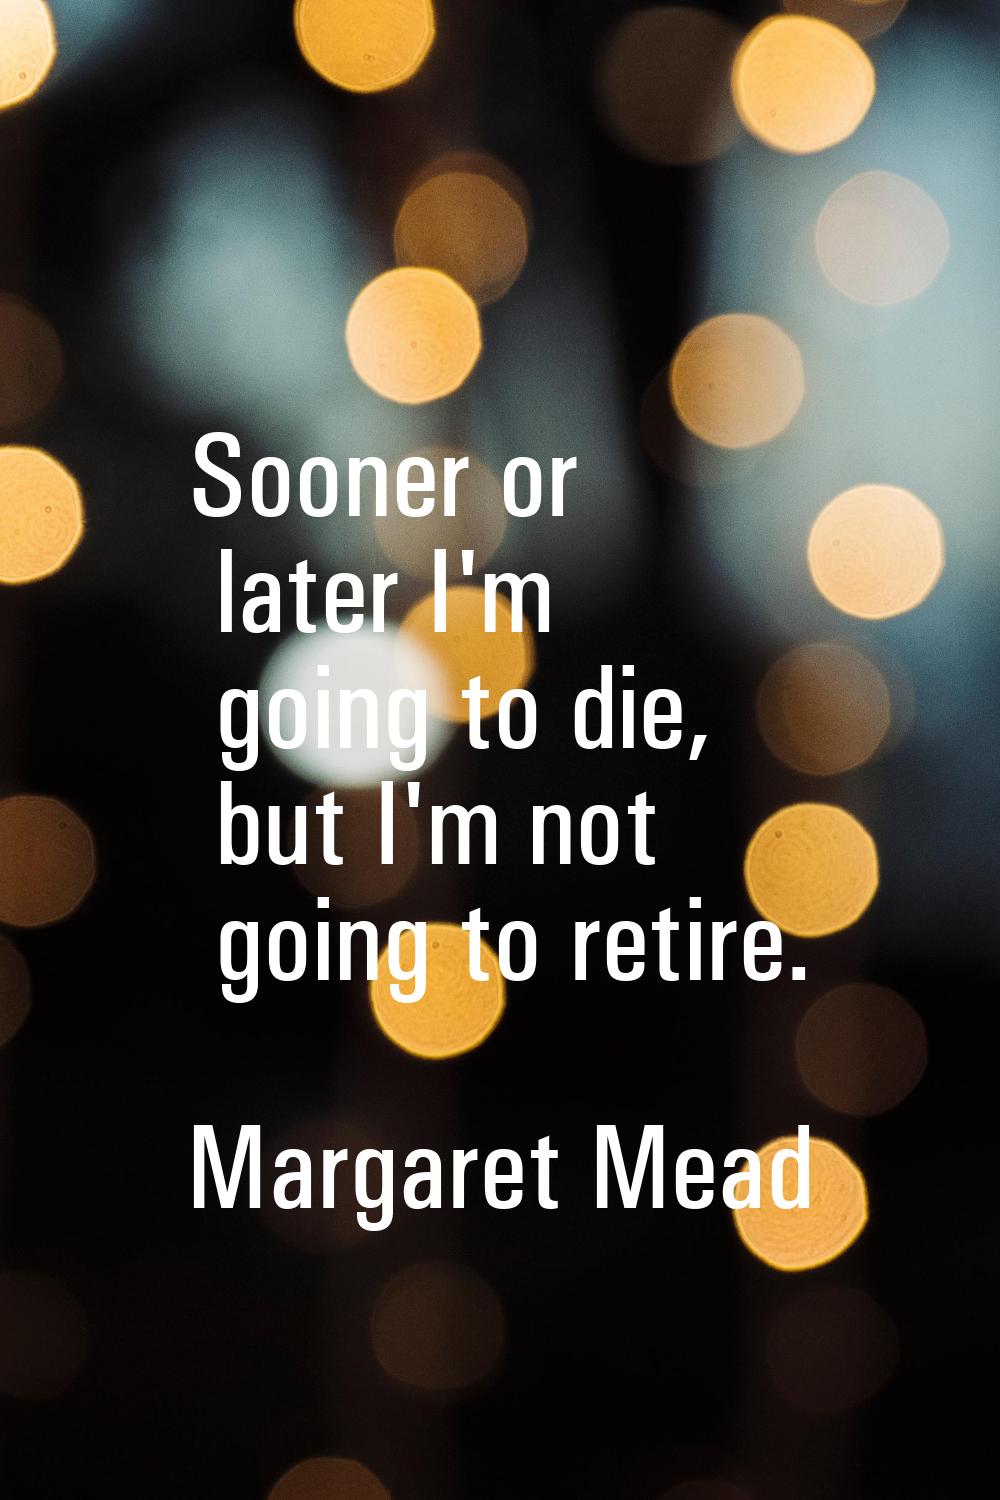 Sooner or later I'm going to die, but I'm not going to retire.